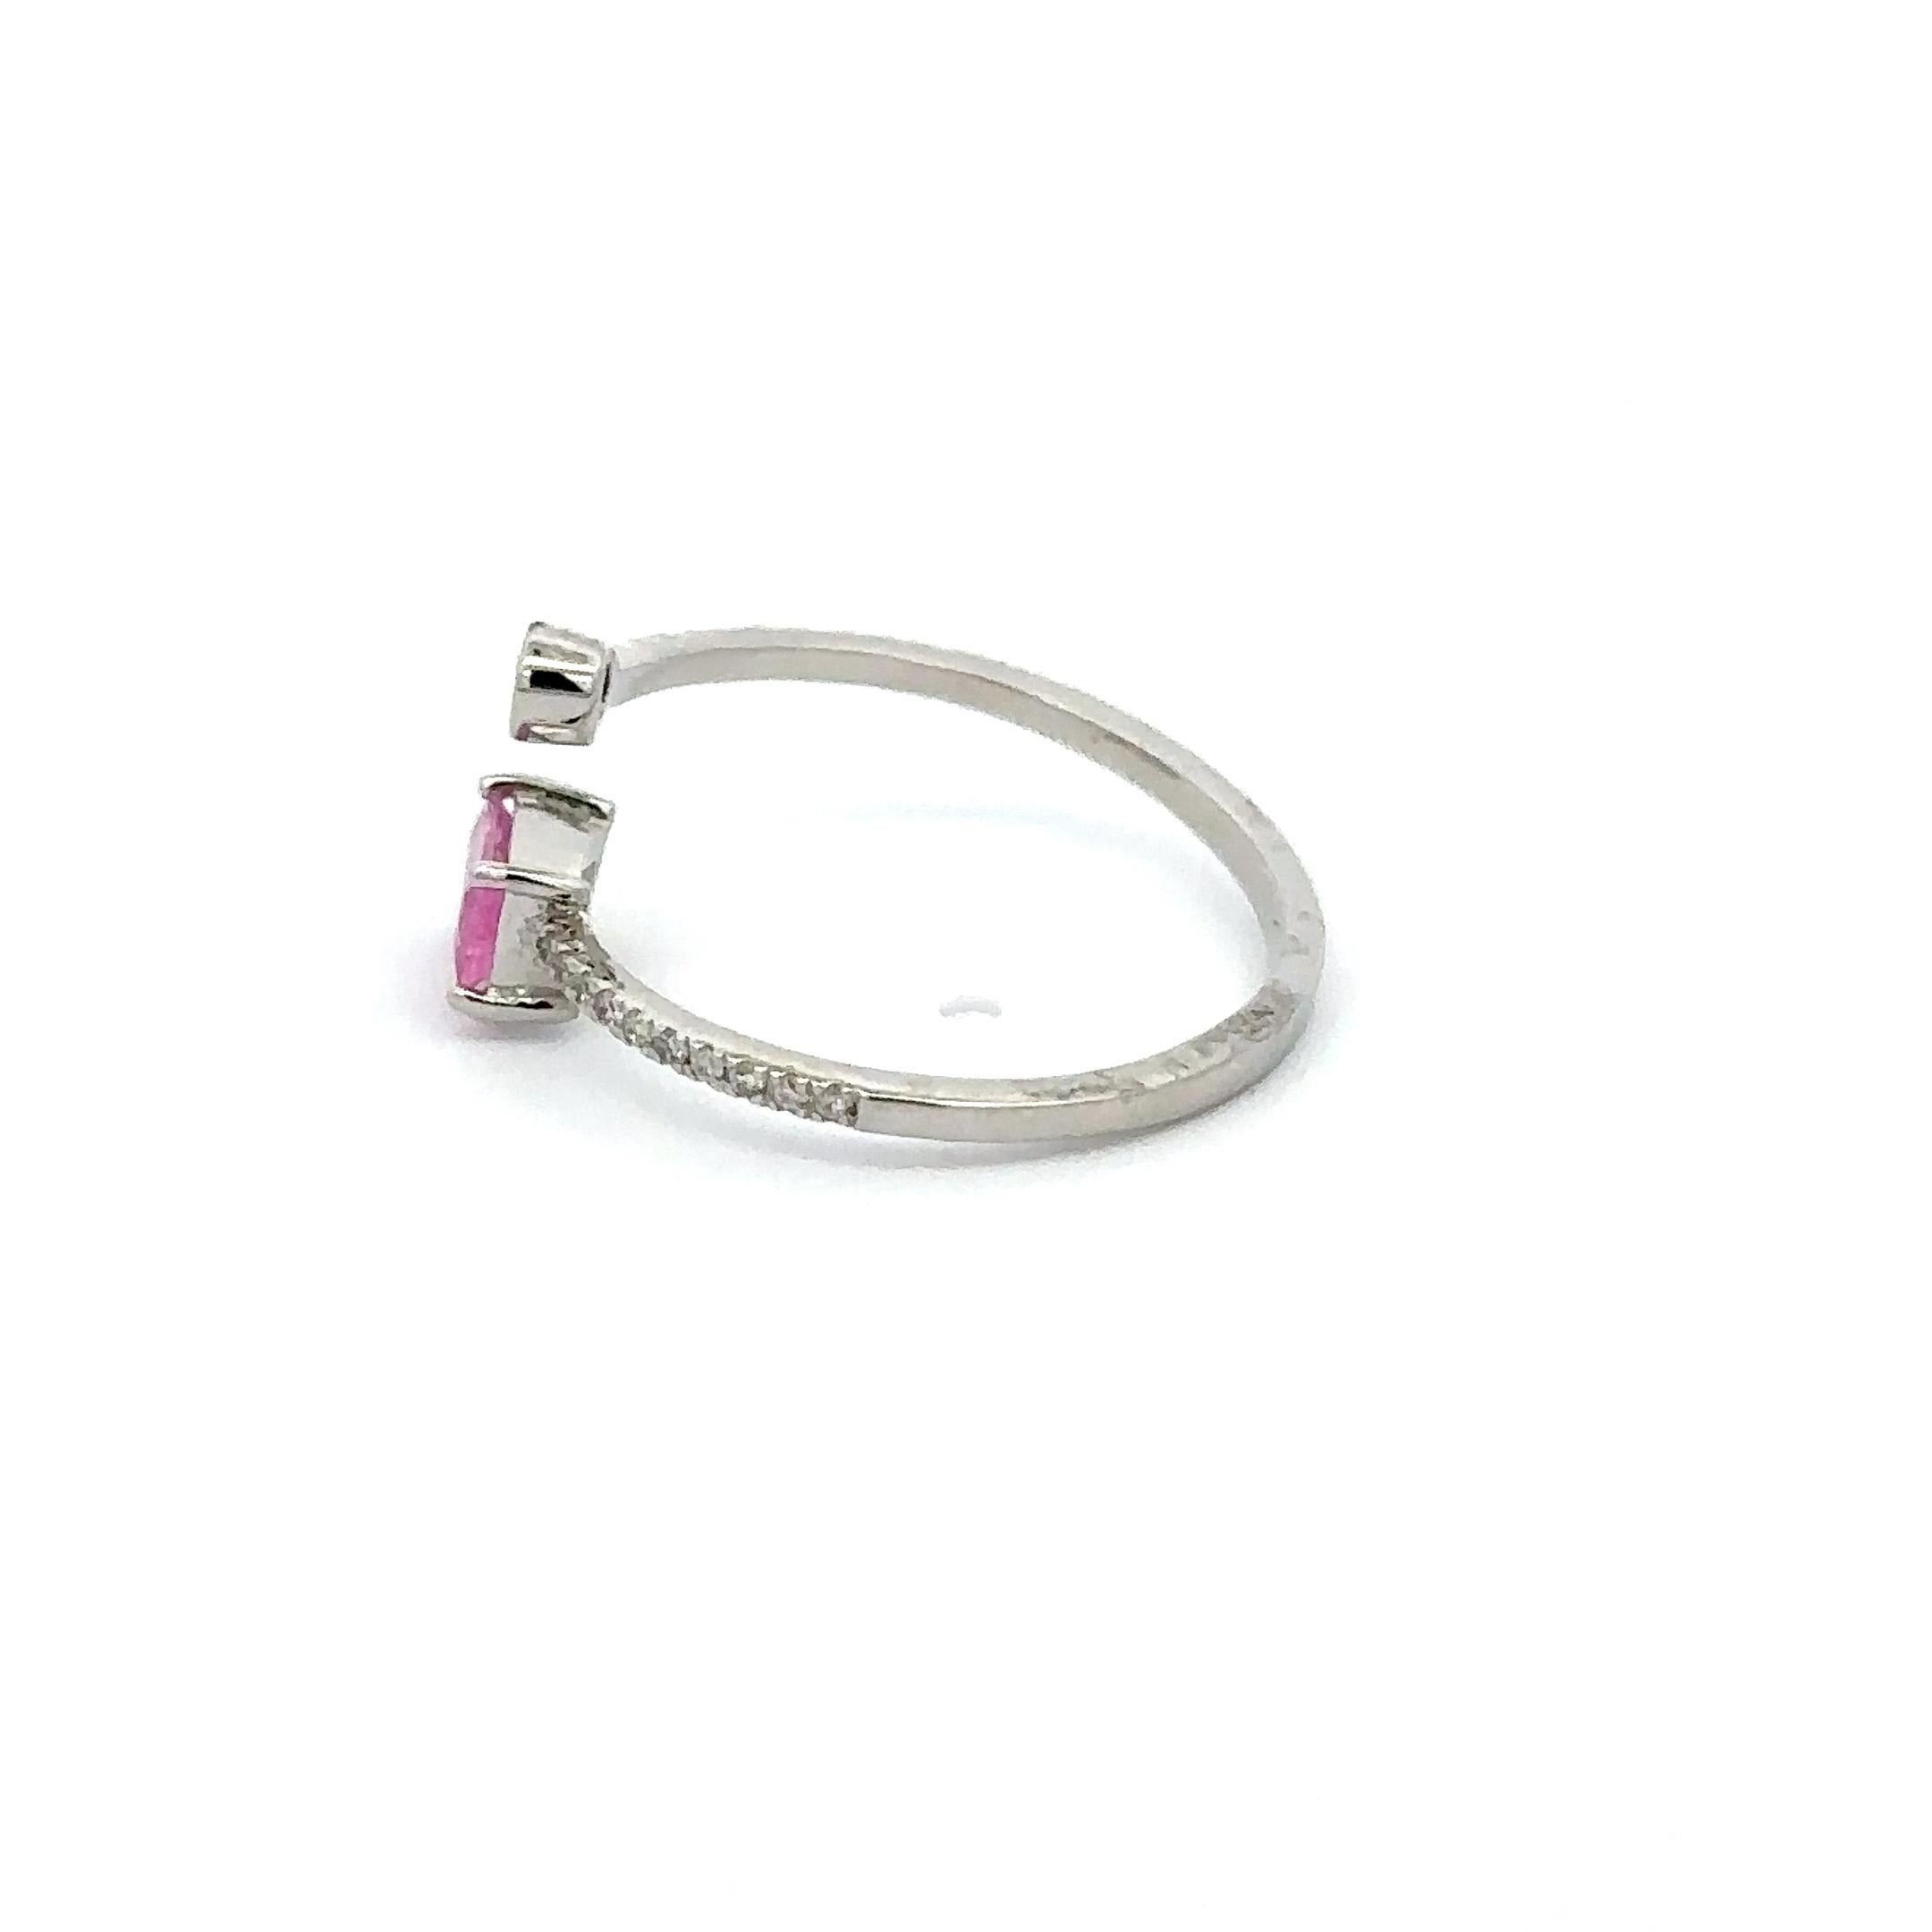 For Sale:  Minimalist Open Ended Ring with Baguette Cut Pink Sapphire and Diamond 4